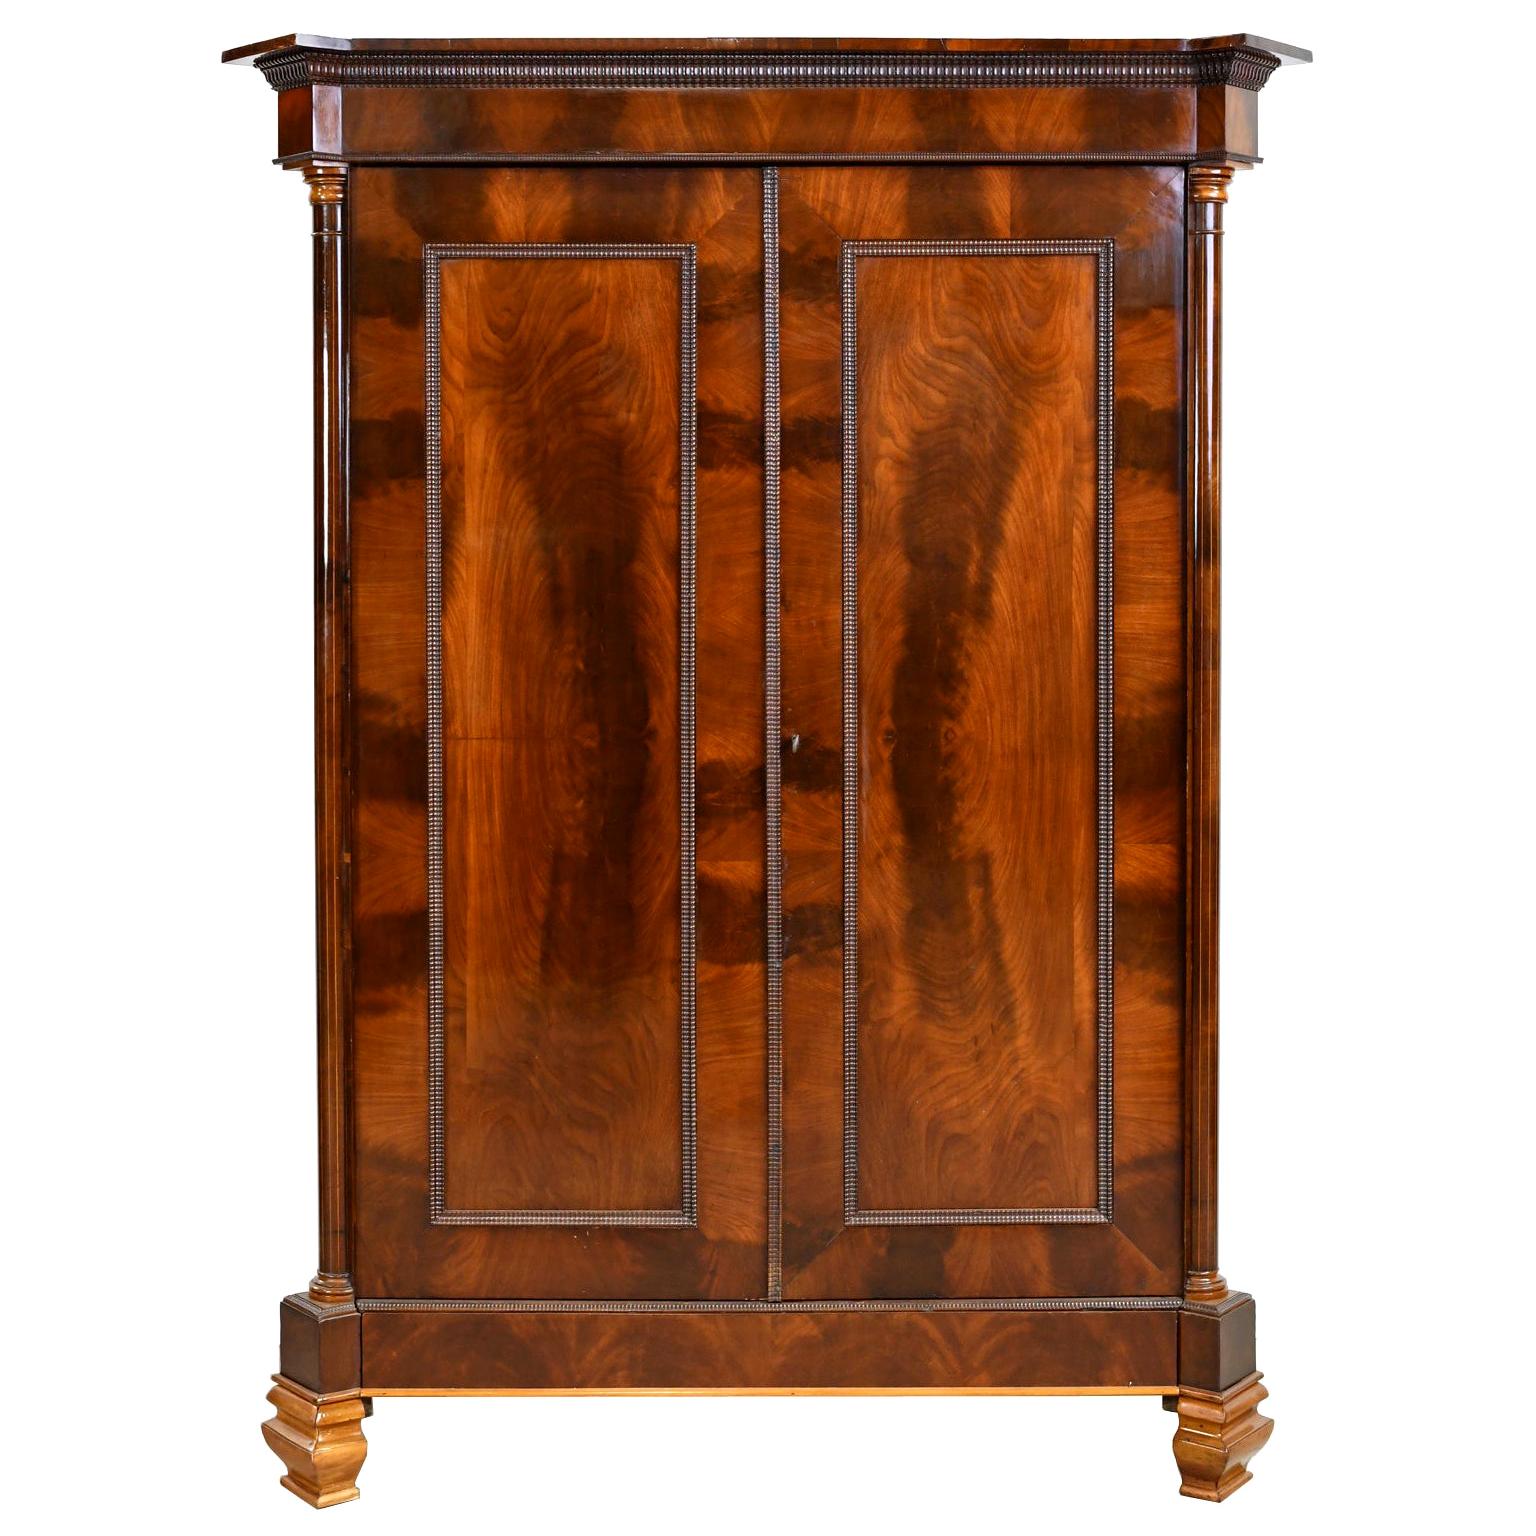 An exquisite armoire in West Indies mahogany with fine book-matching throughout accentuating the beautiful figuring of this choice wood's grain. On the chamfered corners are turned mahogany columns with fine line inlays of satinwood that flank two